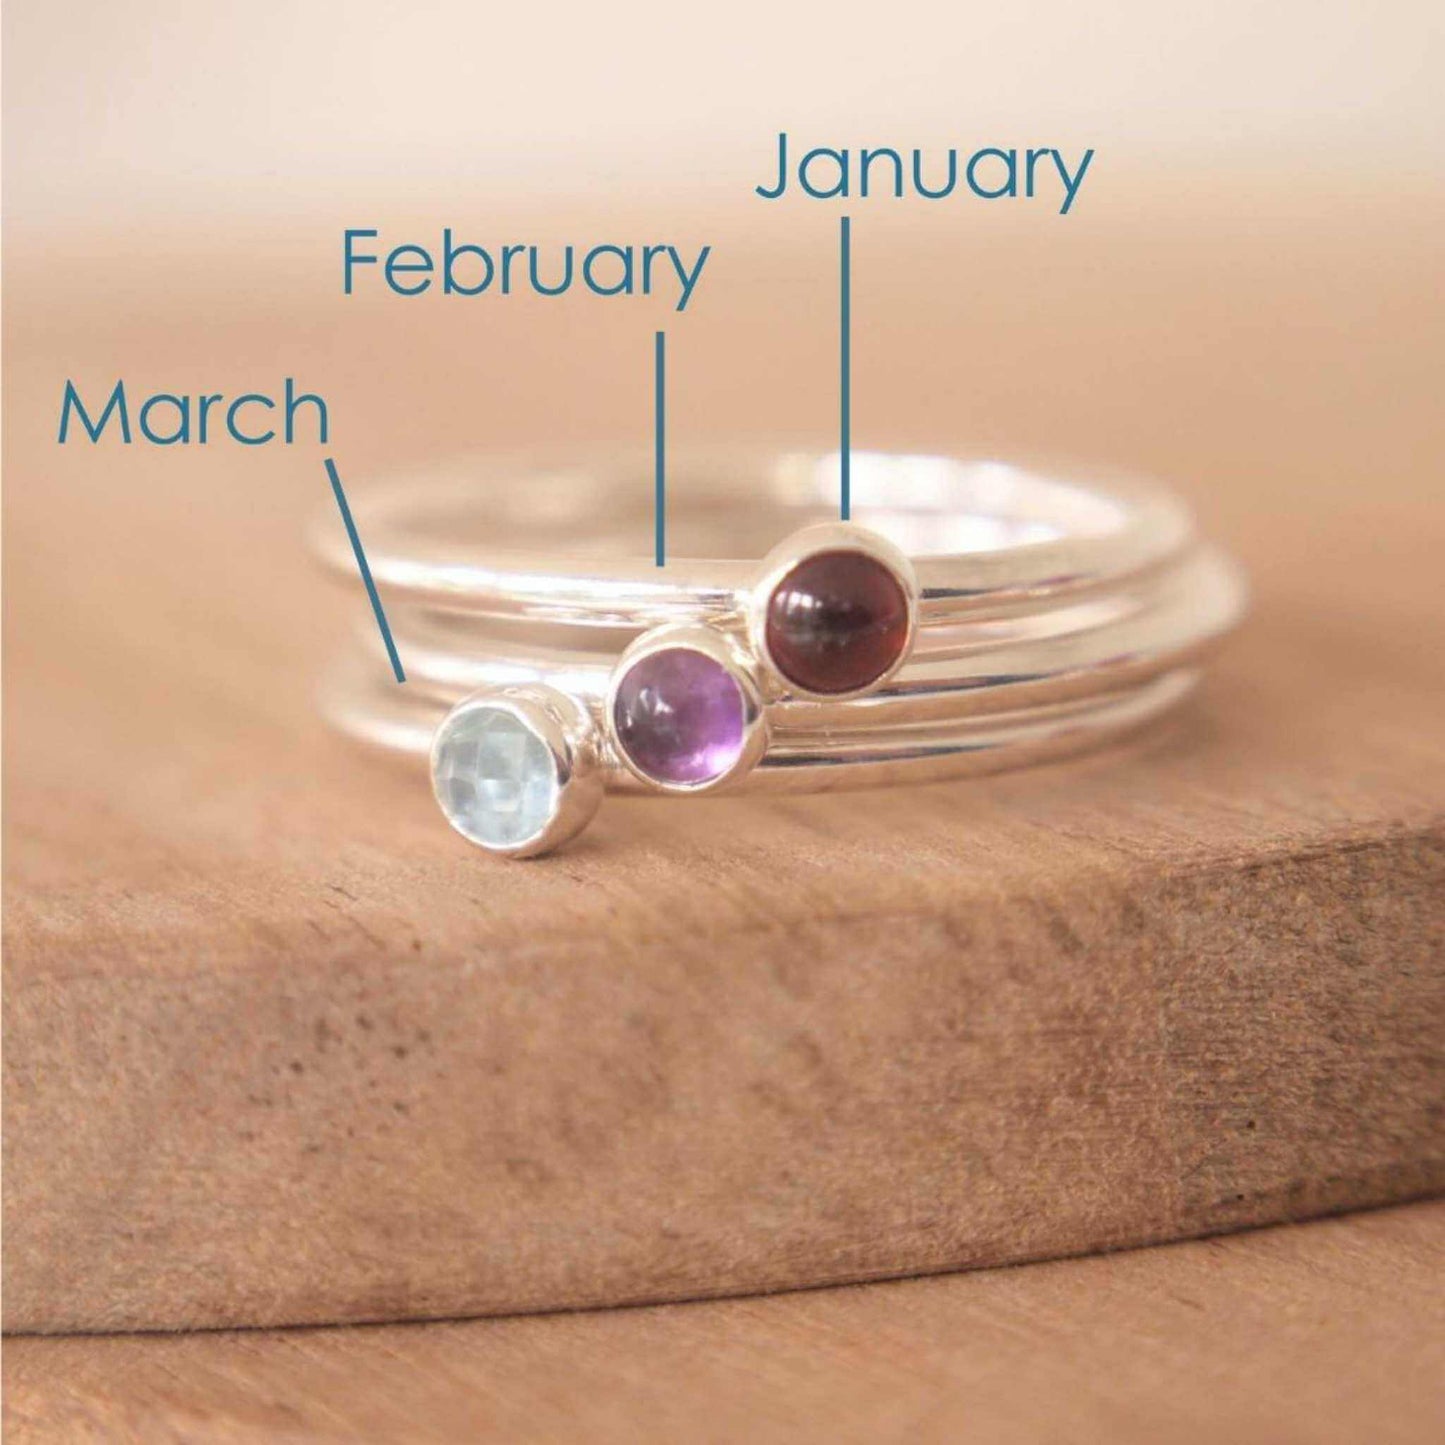 Three Silver rings, each set simply with a single gemstone in Garnet, Amethyst and Blue Topaz in a round 3mm size. Birthstones for January, February and March. Handmade by Maram Jewellery in Edinburgh